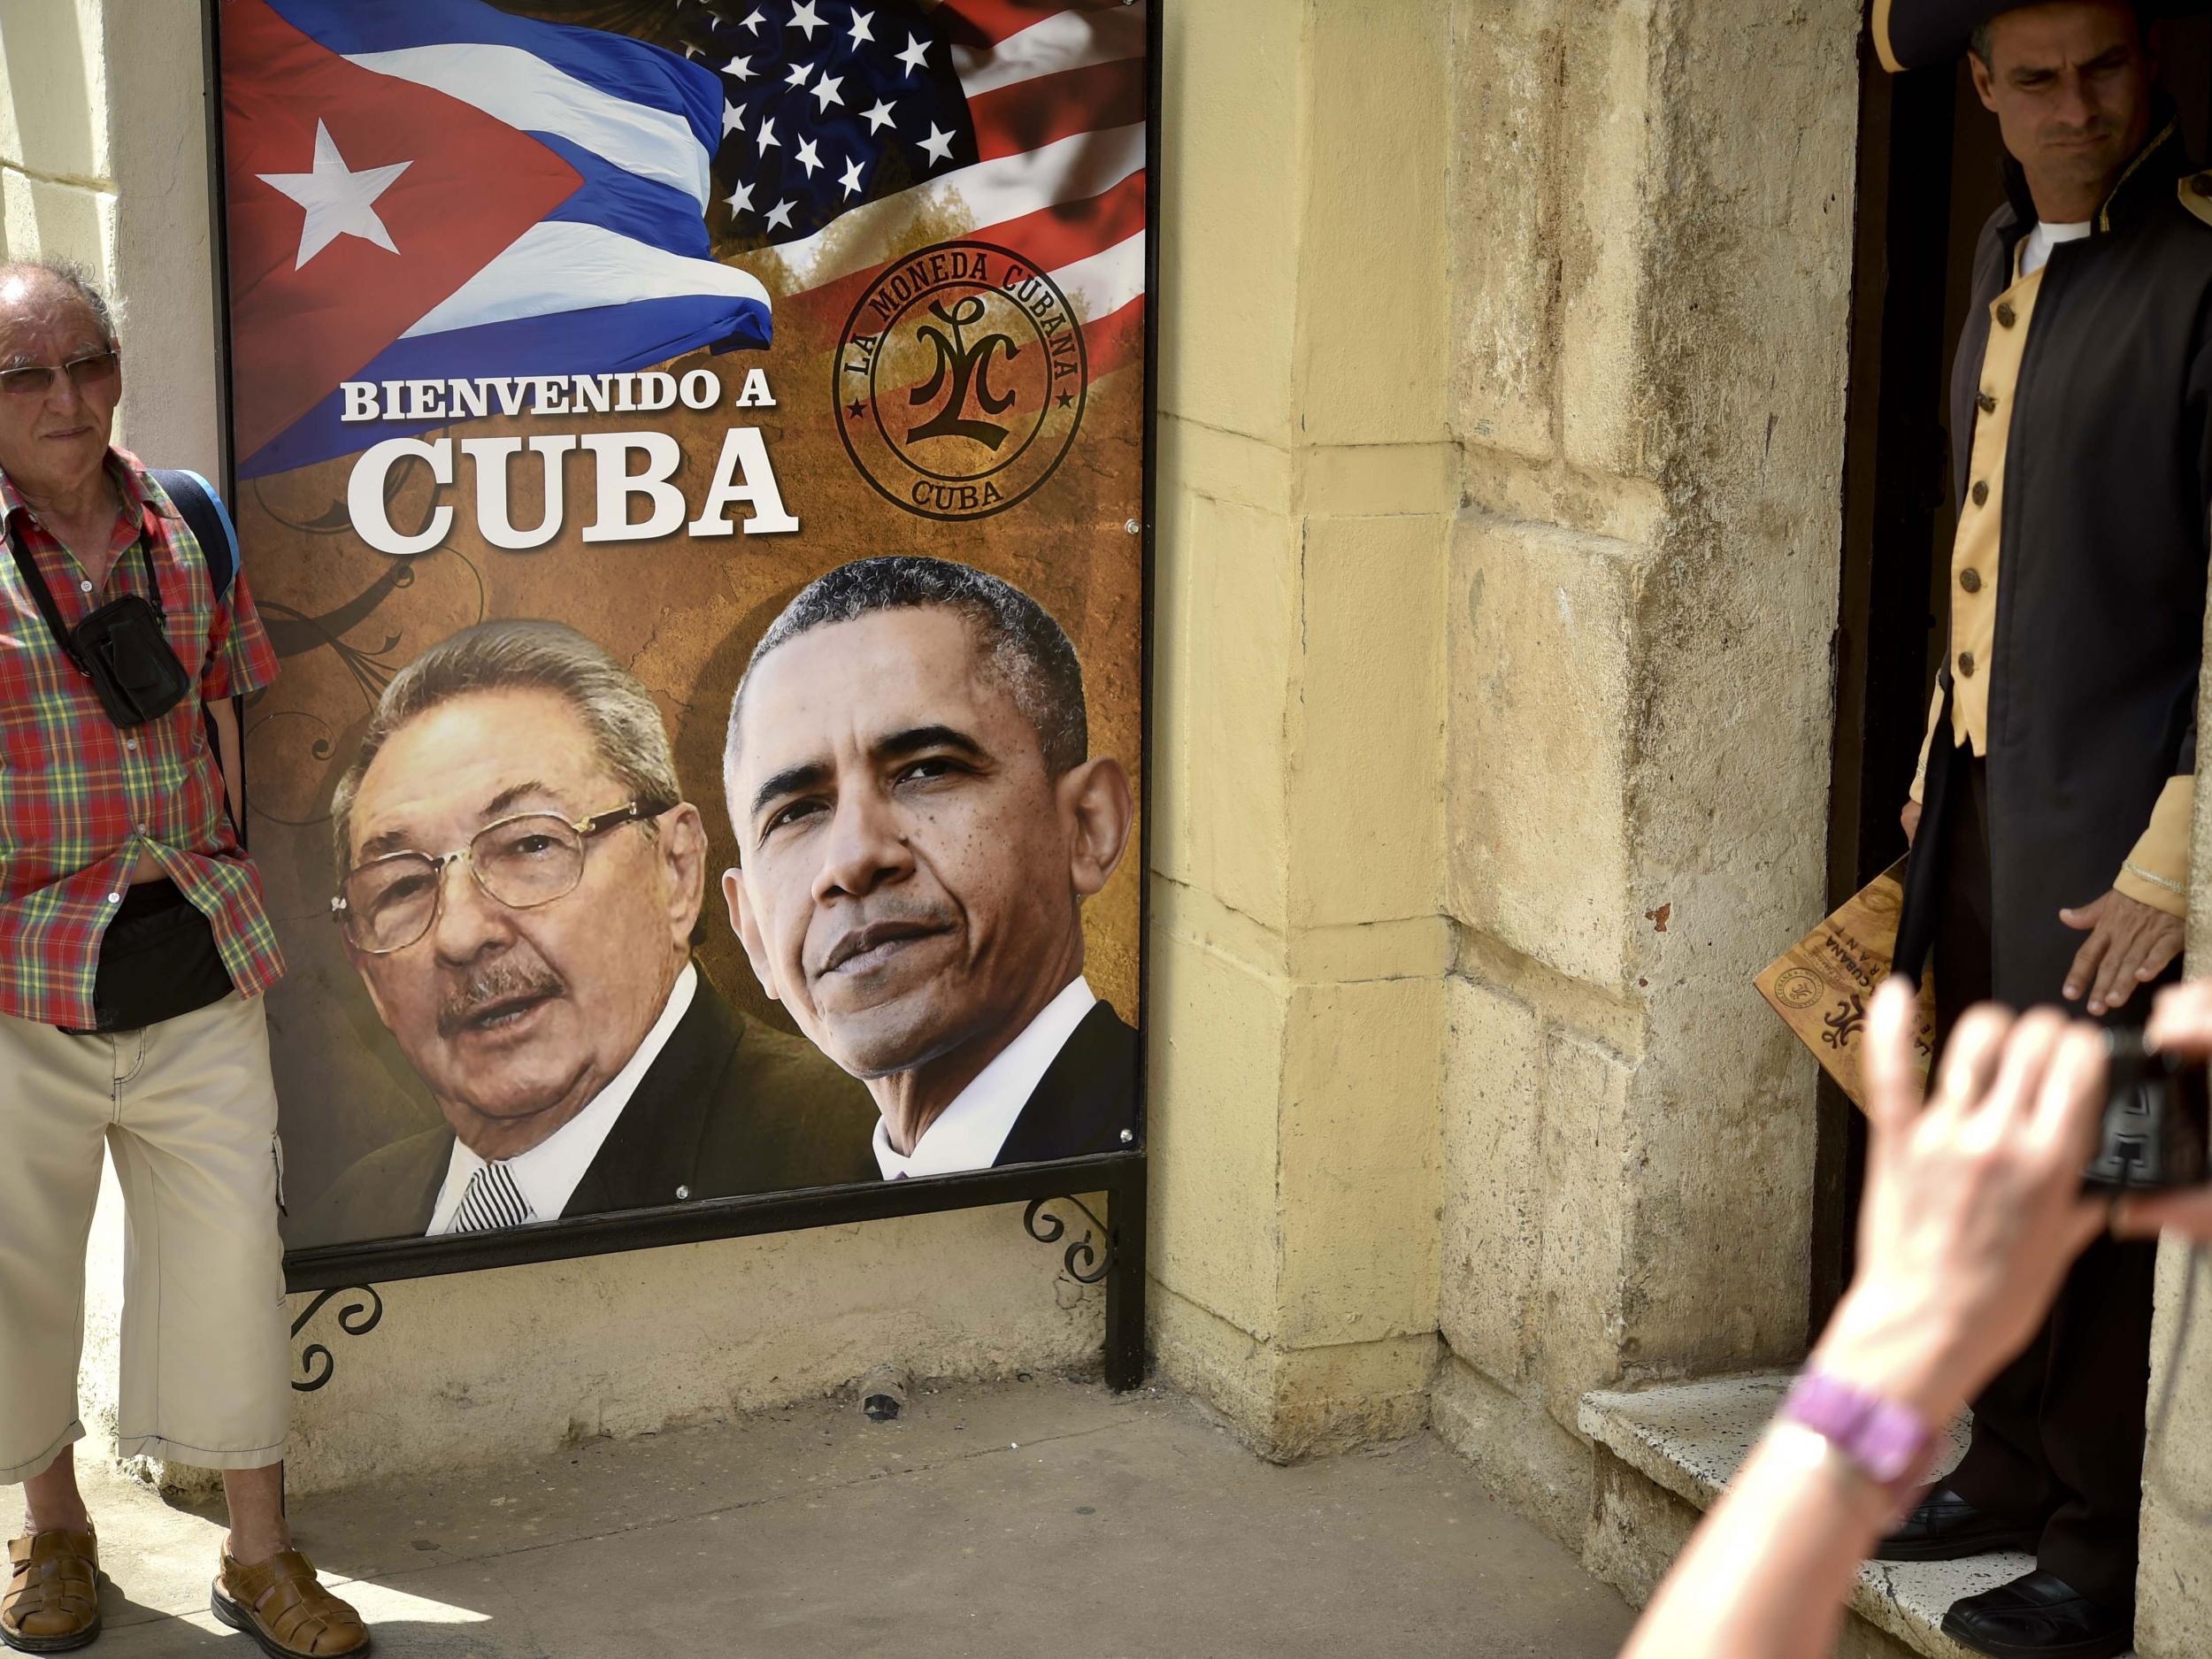 The deal comes just before President Barack Obama’s historic visit to Cuba